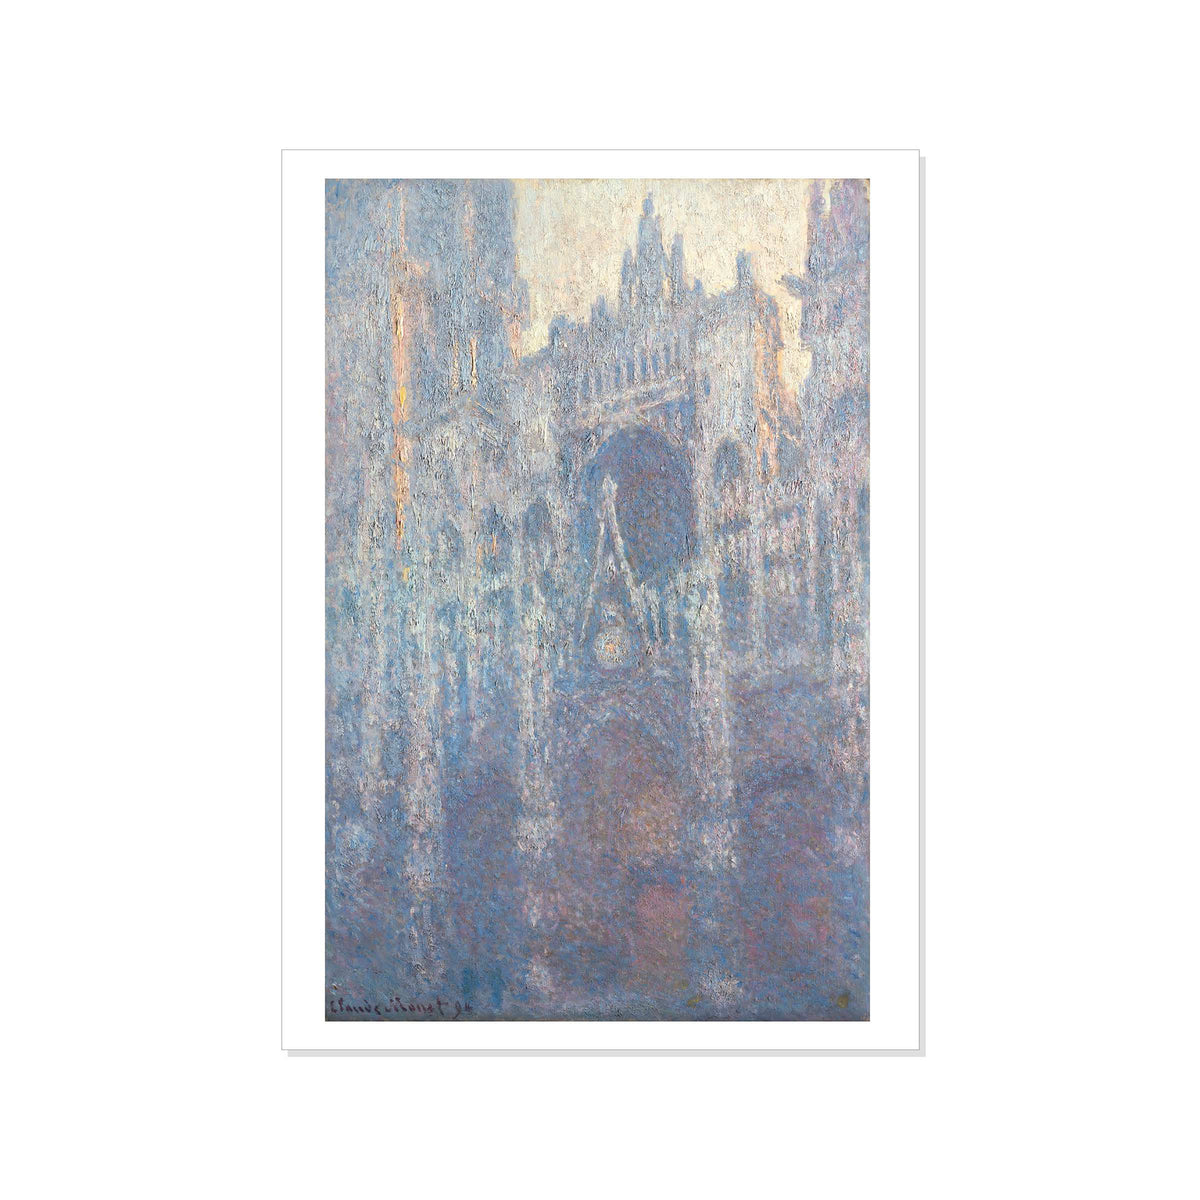 Monet - Portal of Rouen Cathedral in Morning Light - Postcard